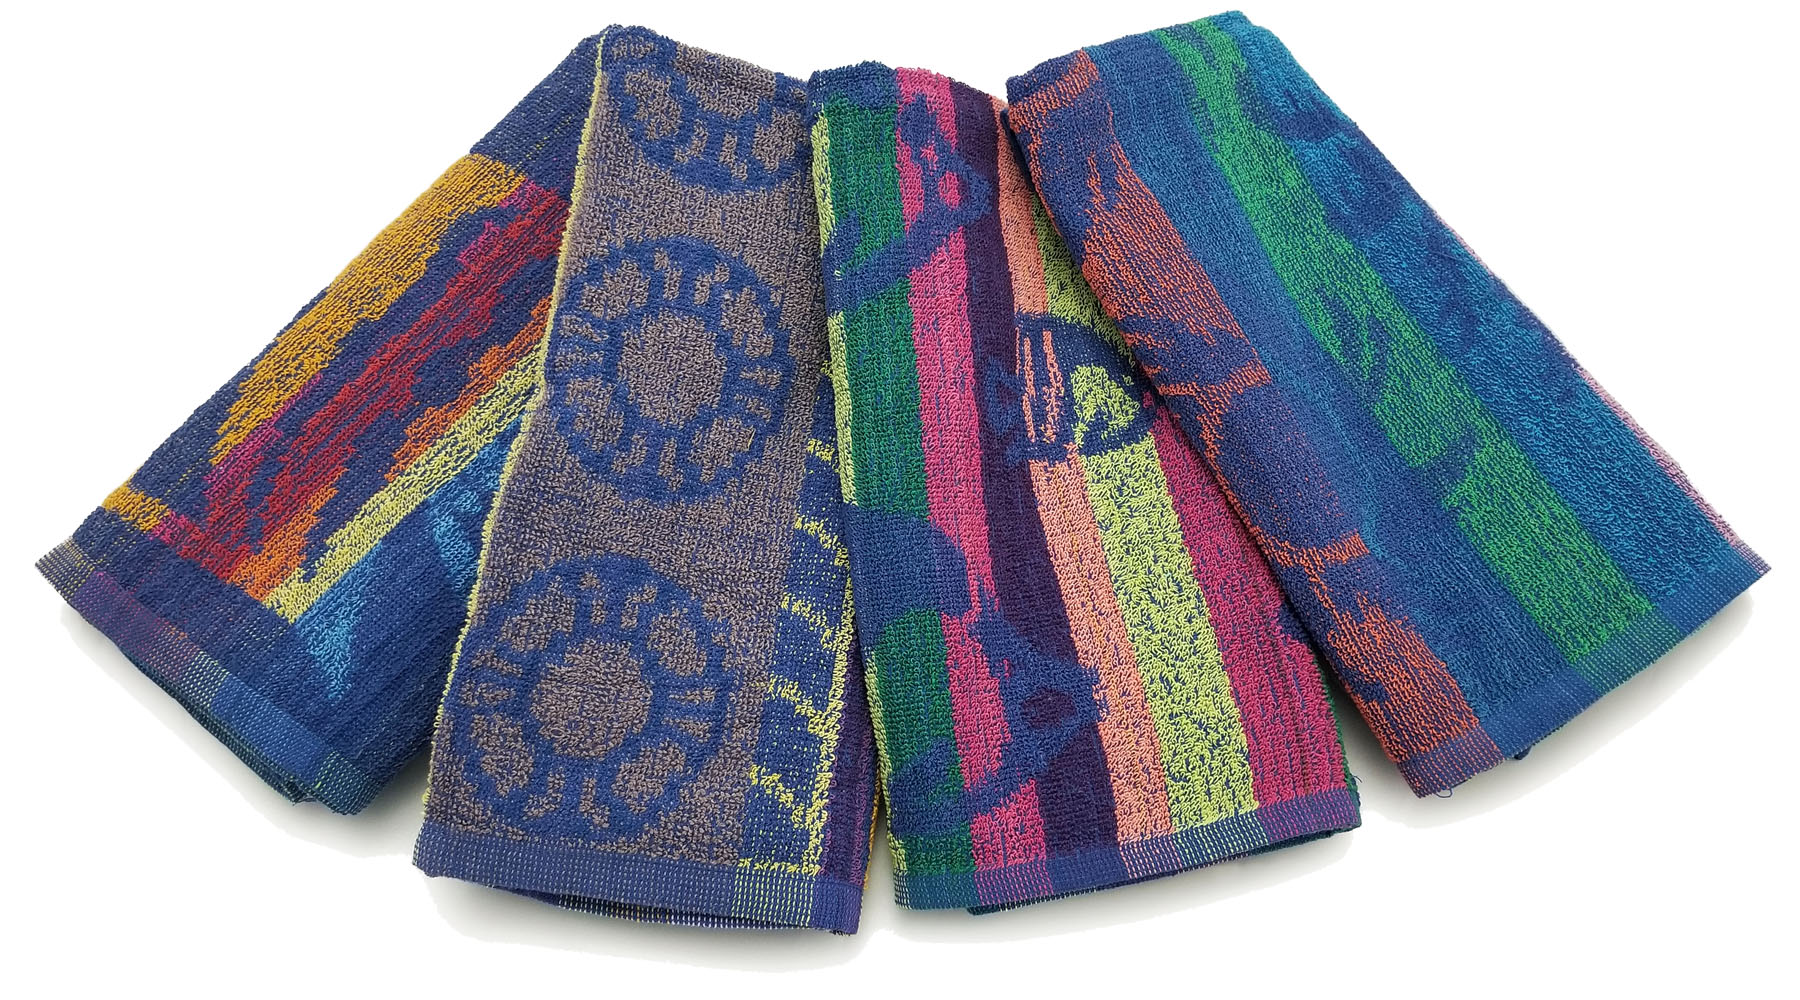 SILKSCREEN 29x59 Lightweight Economy Jacquard Assorted Design Towels. 100% Cotton. Low cost with colored varying colored designs